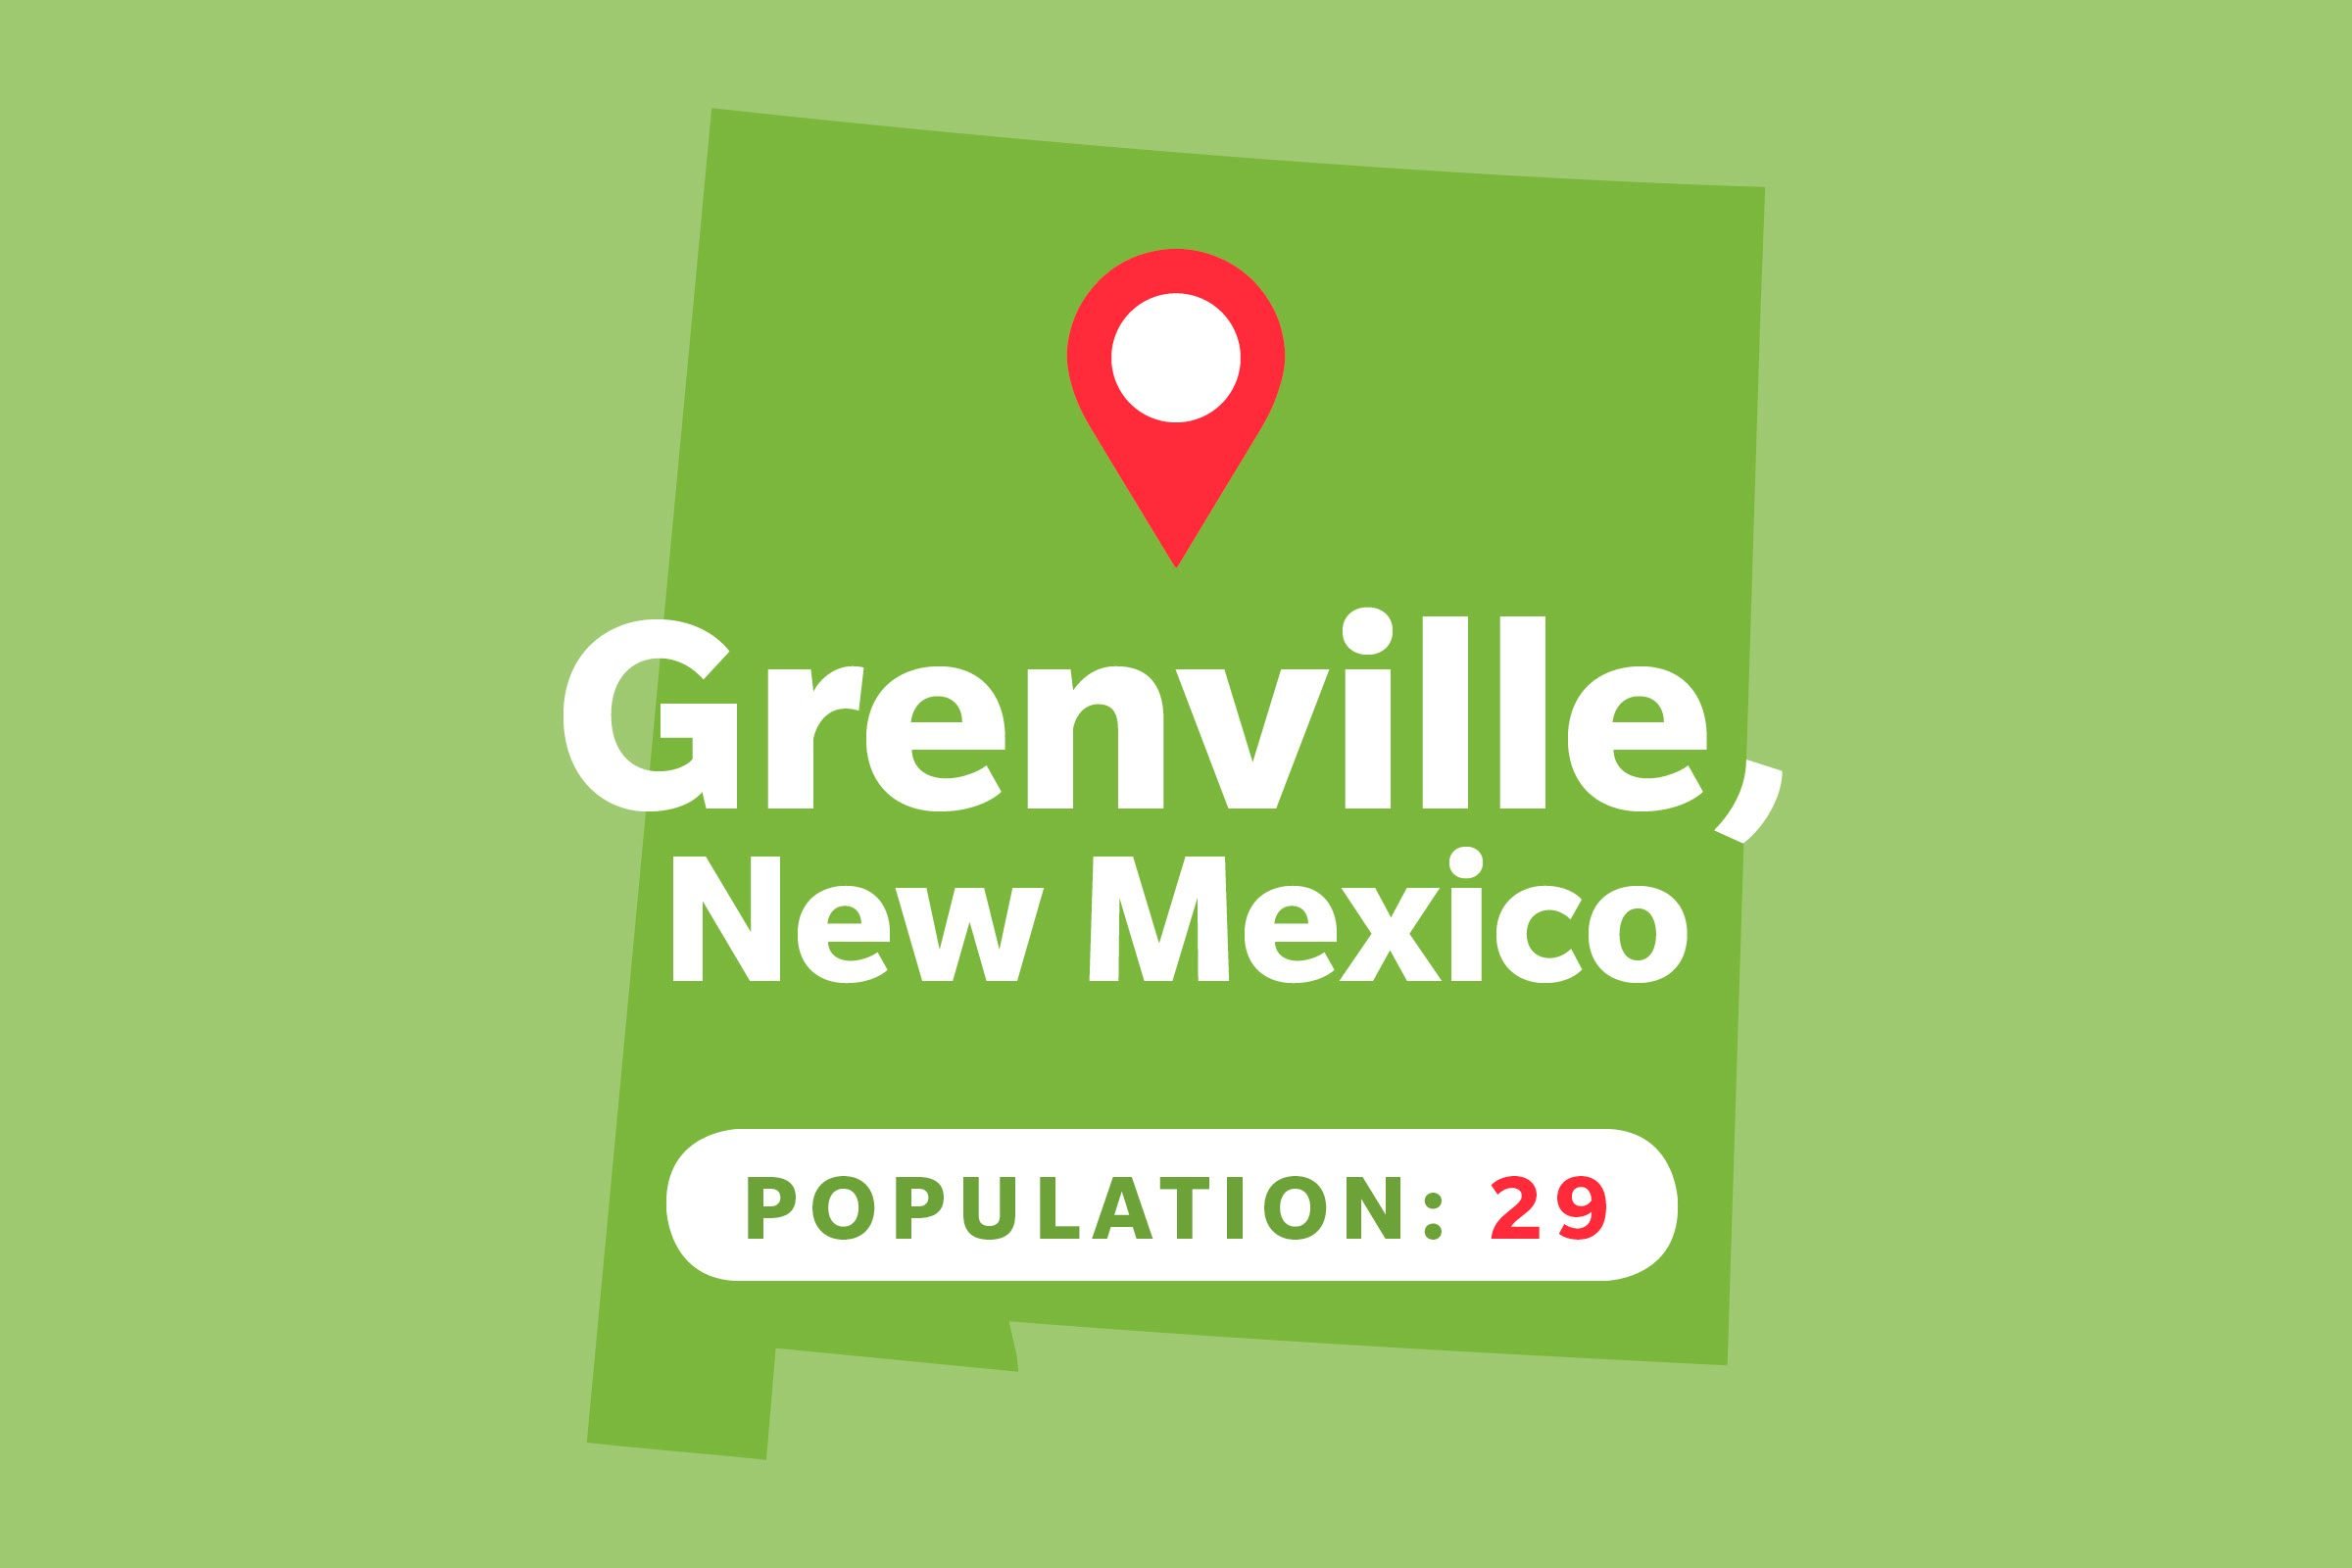 Grenville, New Mexico